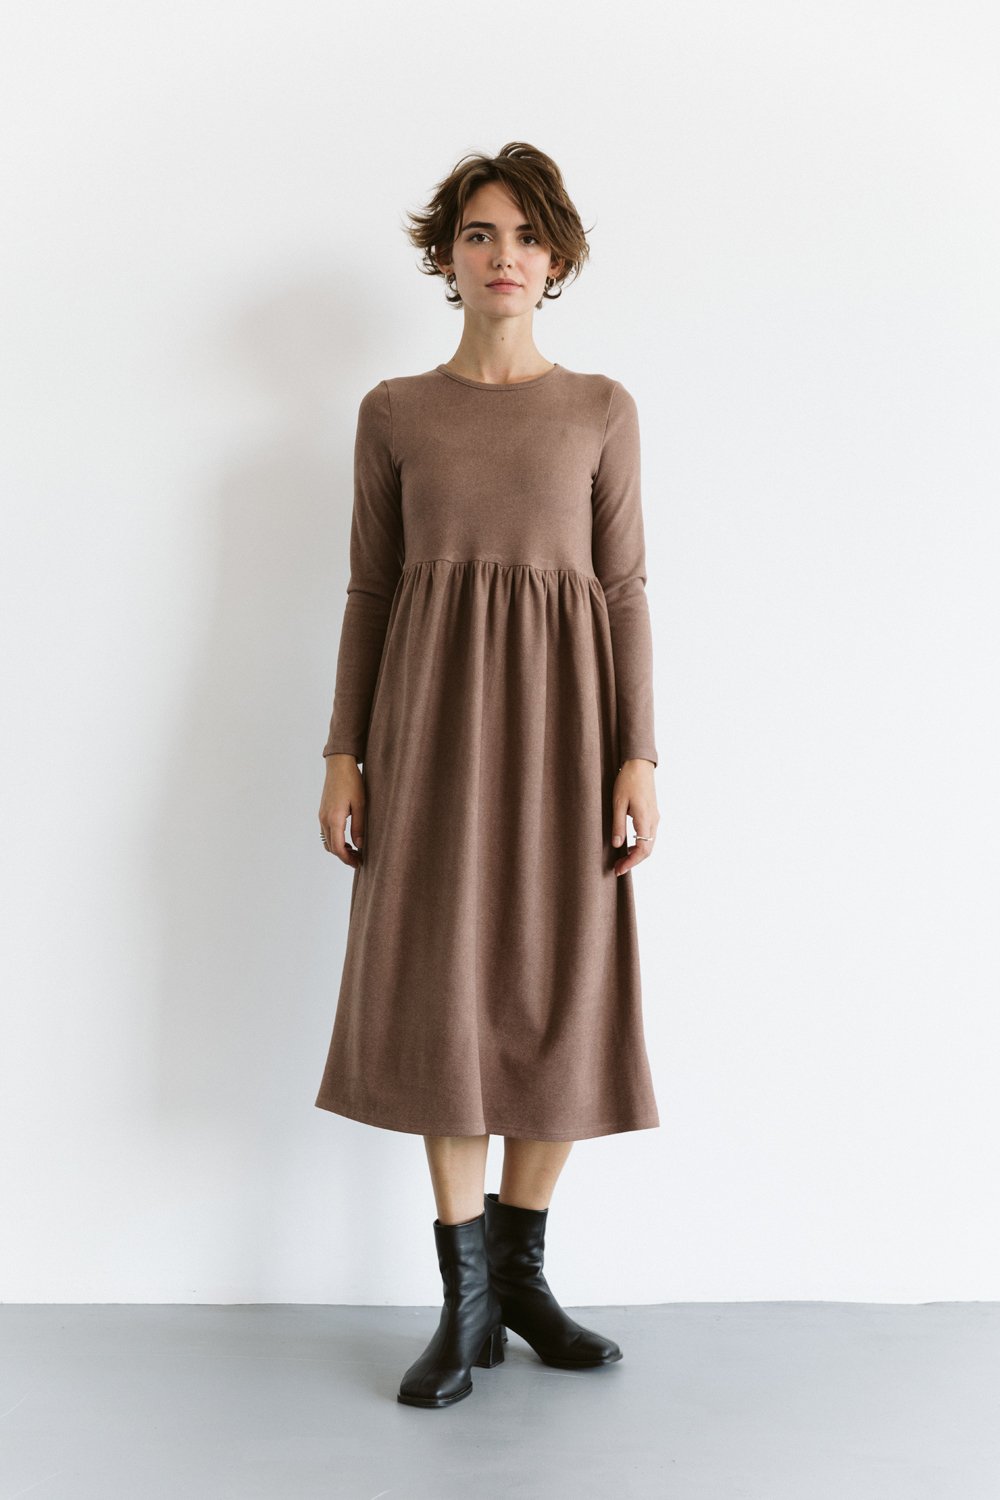 High-waisted dress in Mocha color